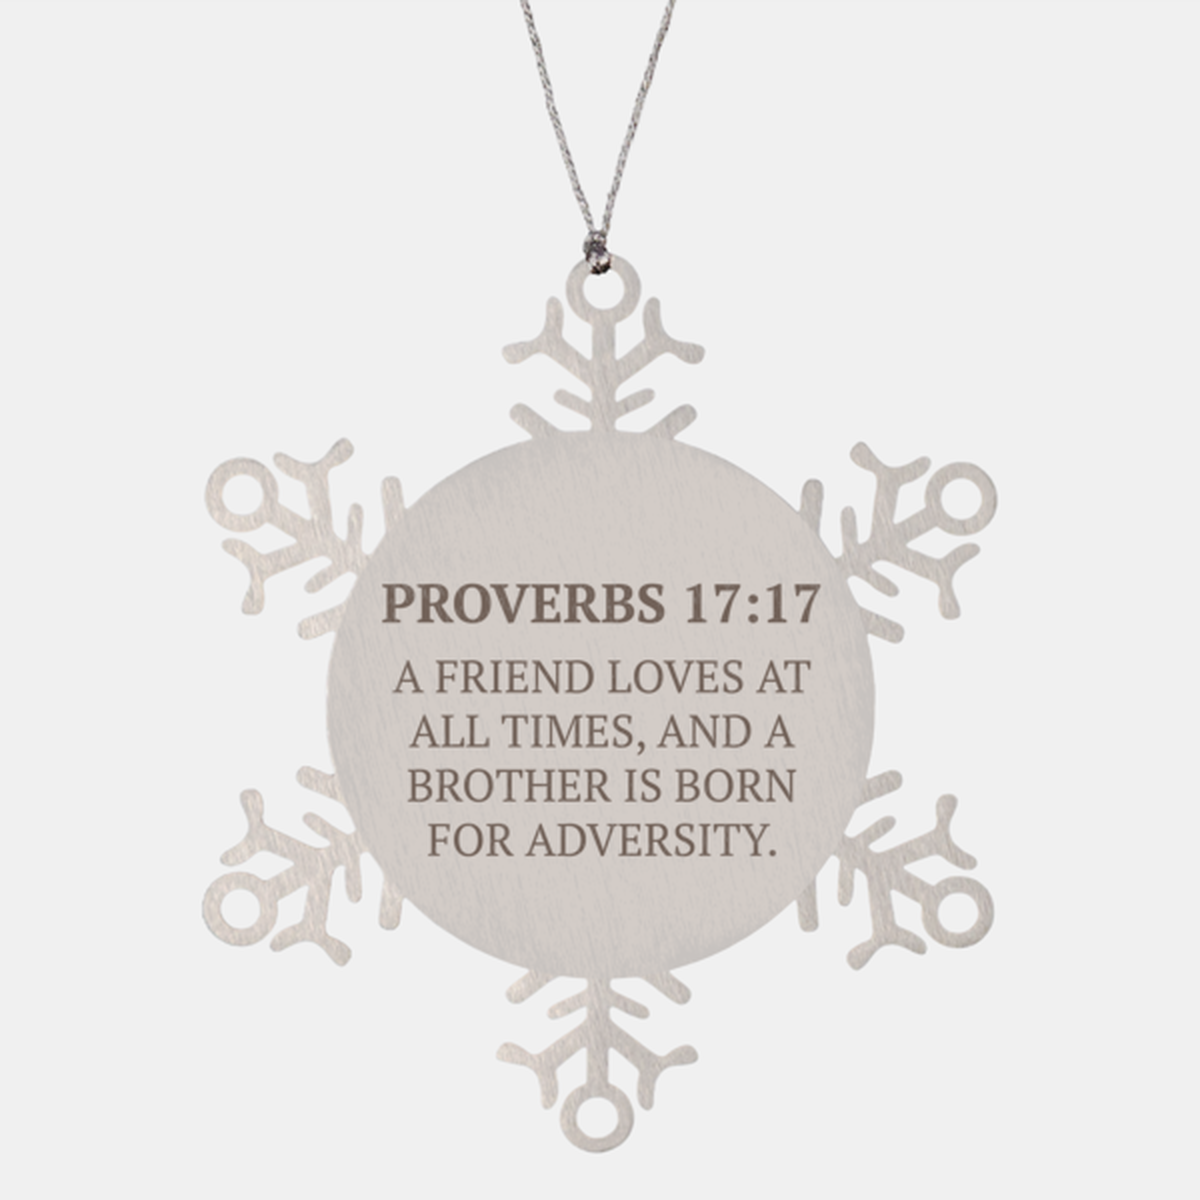 Christian Ornaments For Christmas Tree, A Friend Loves At All Times, Religious Christmas Decorations, Scripture Ornaments Gifts, Bible Verse Ornament